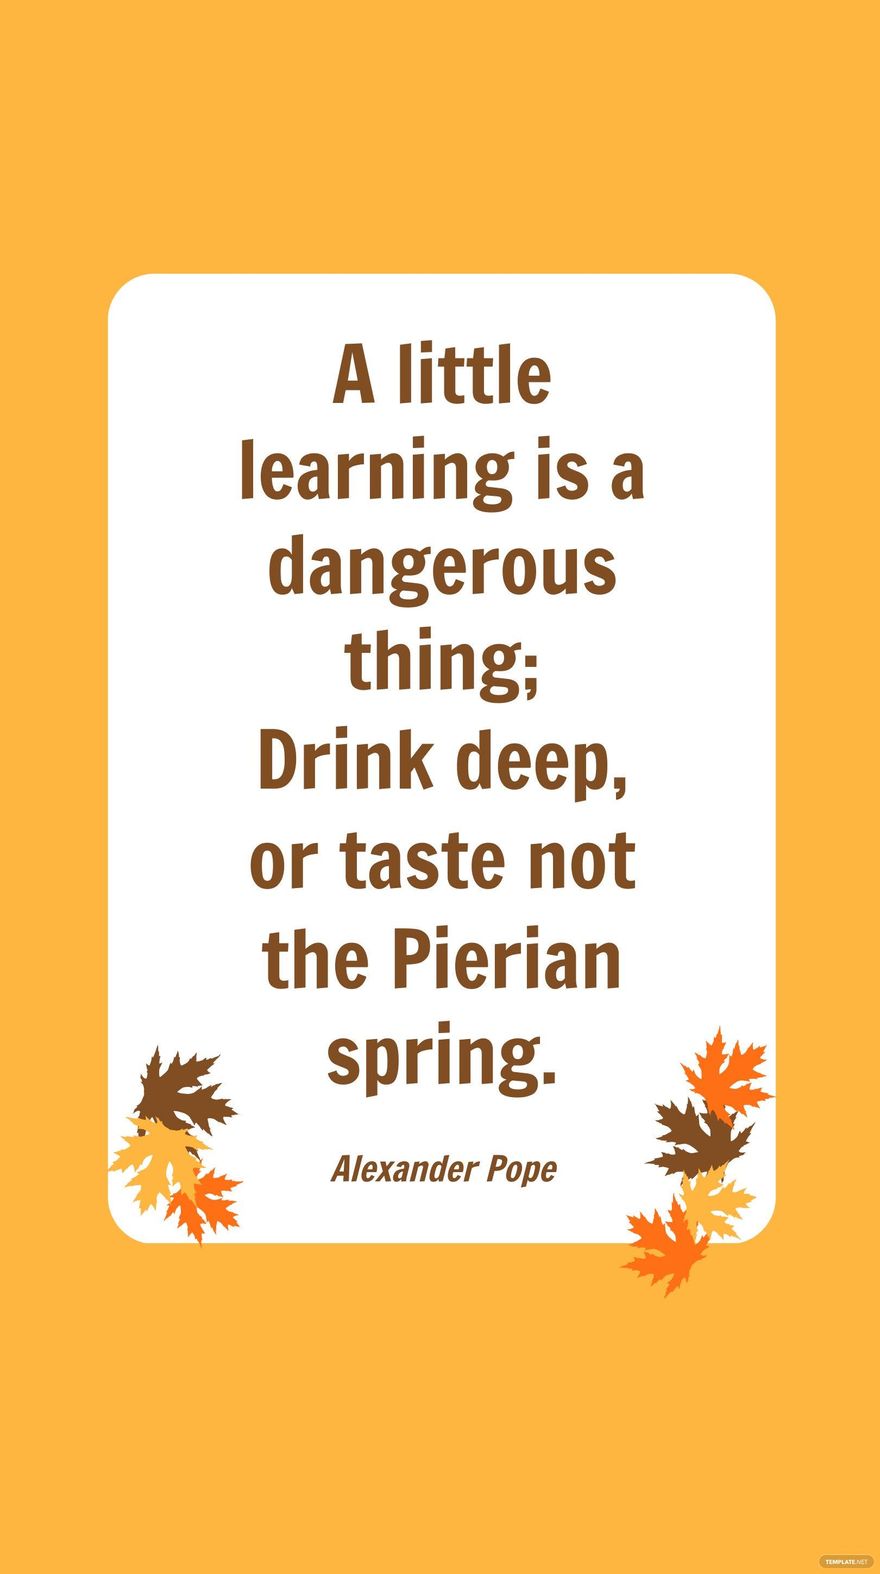 Free Alexander Pope - A little learning is a dangerous thing; Drink deep, or taste not the Pierian spring. in JPG